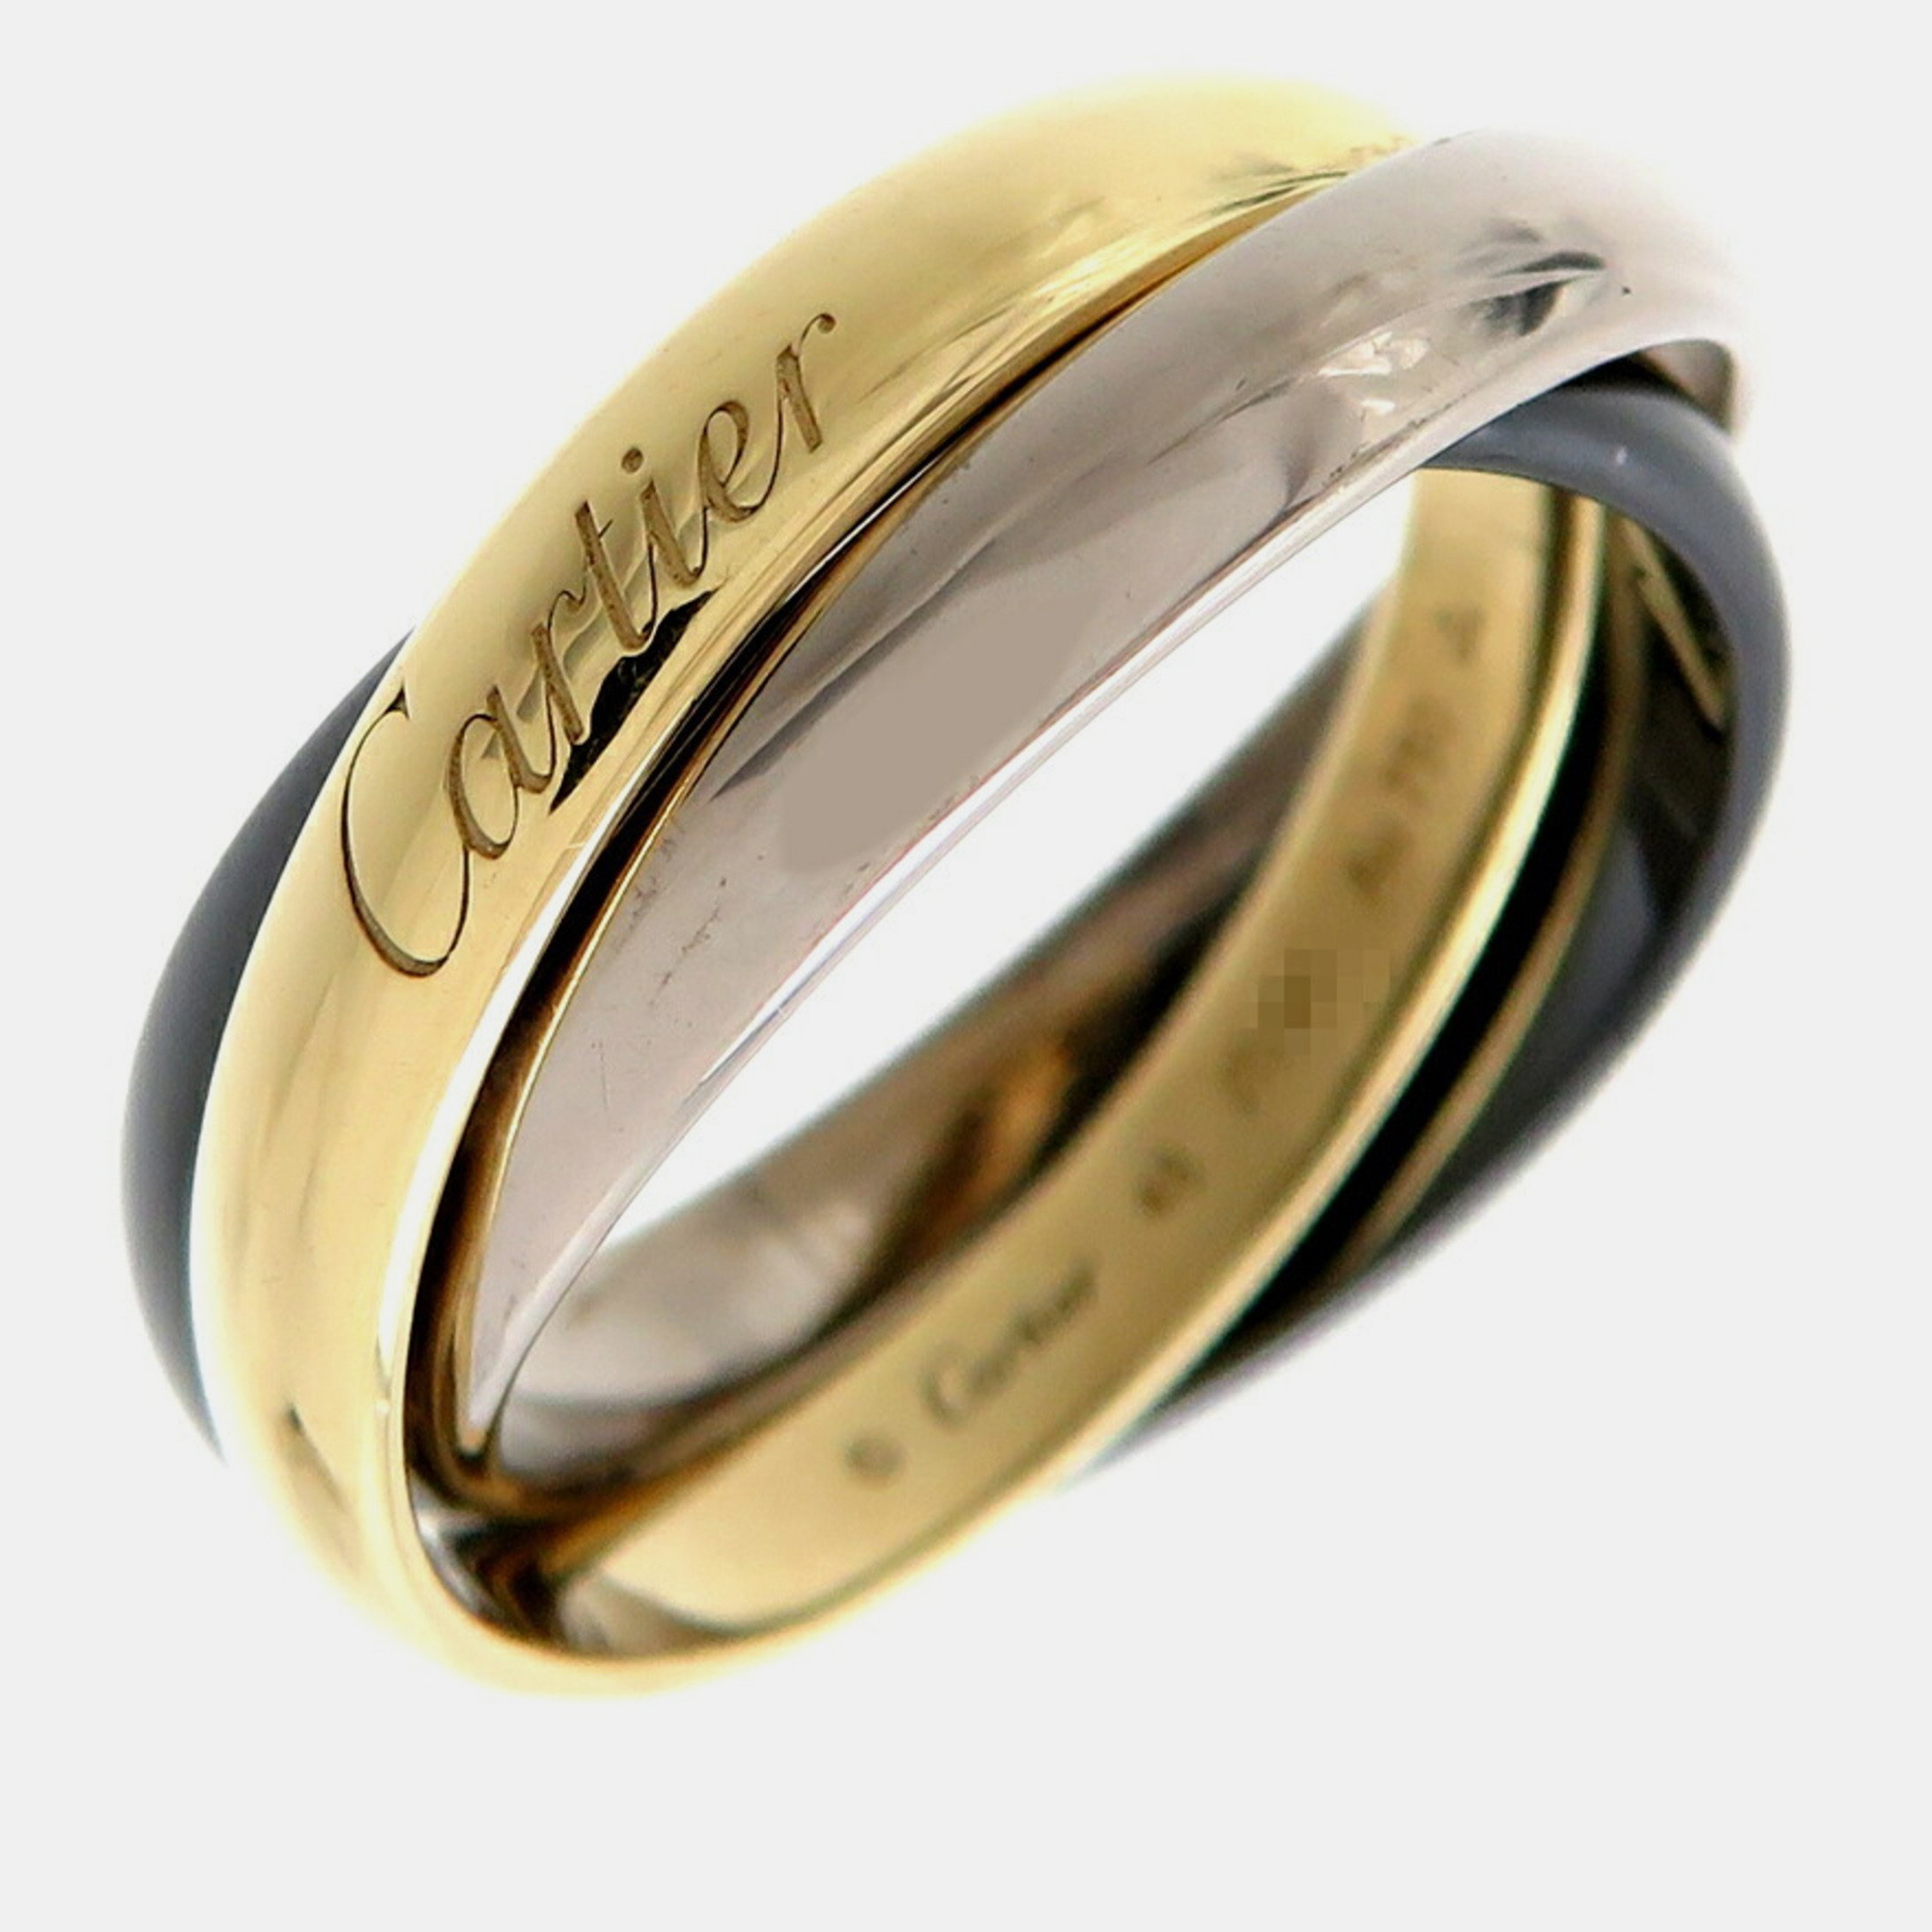 Cartier 18k yellow gold and ceramic trinity band ring eu 48